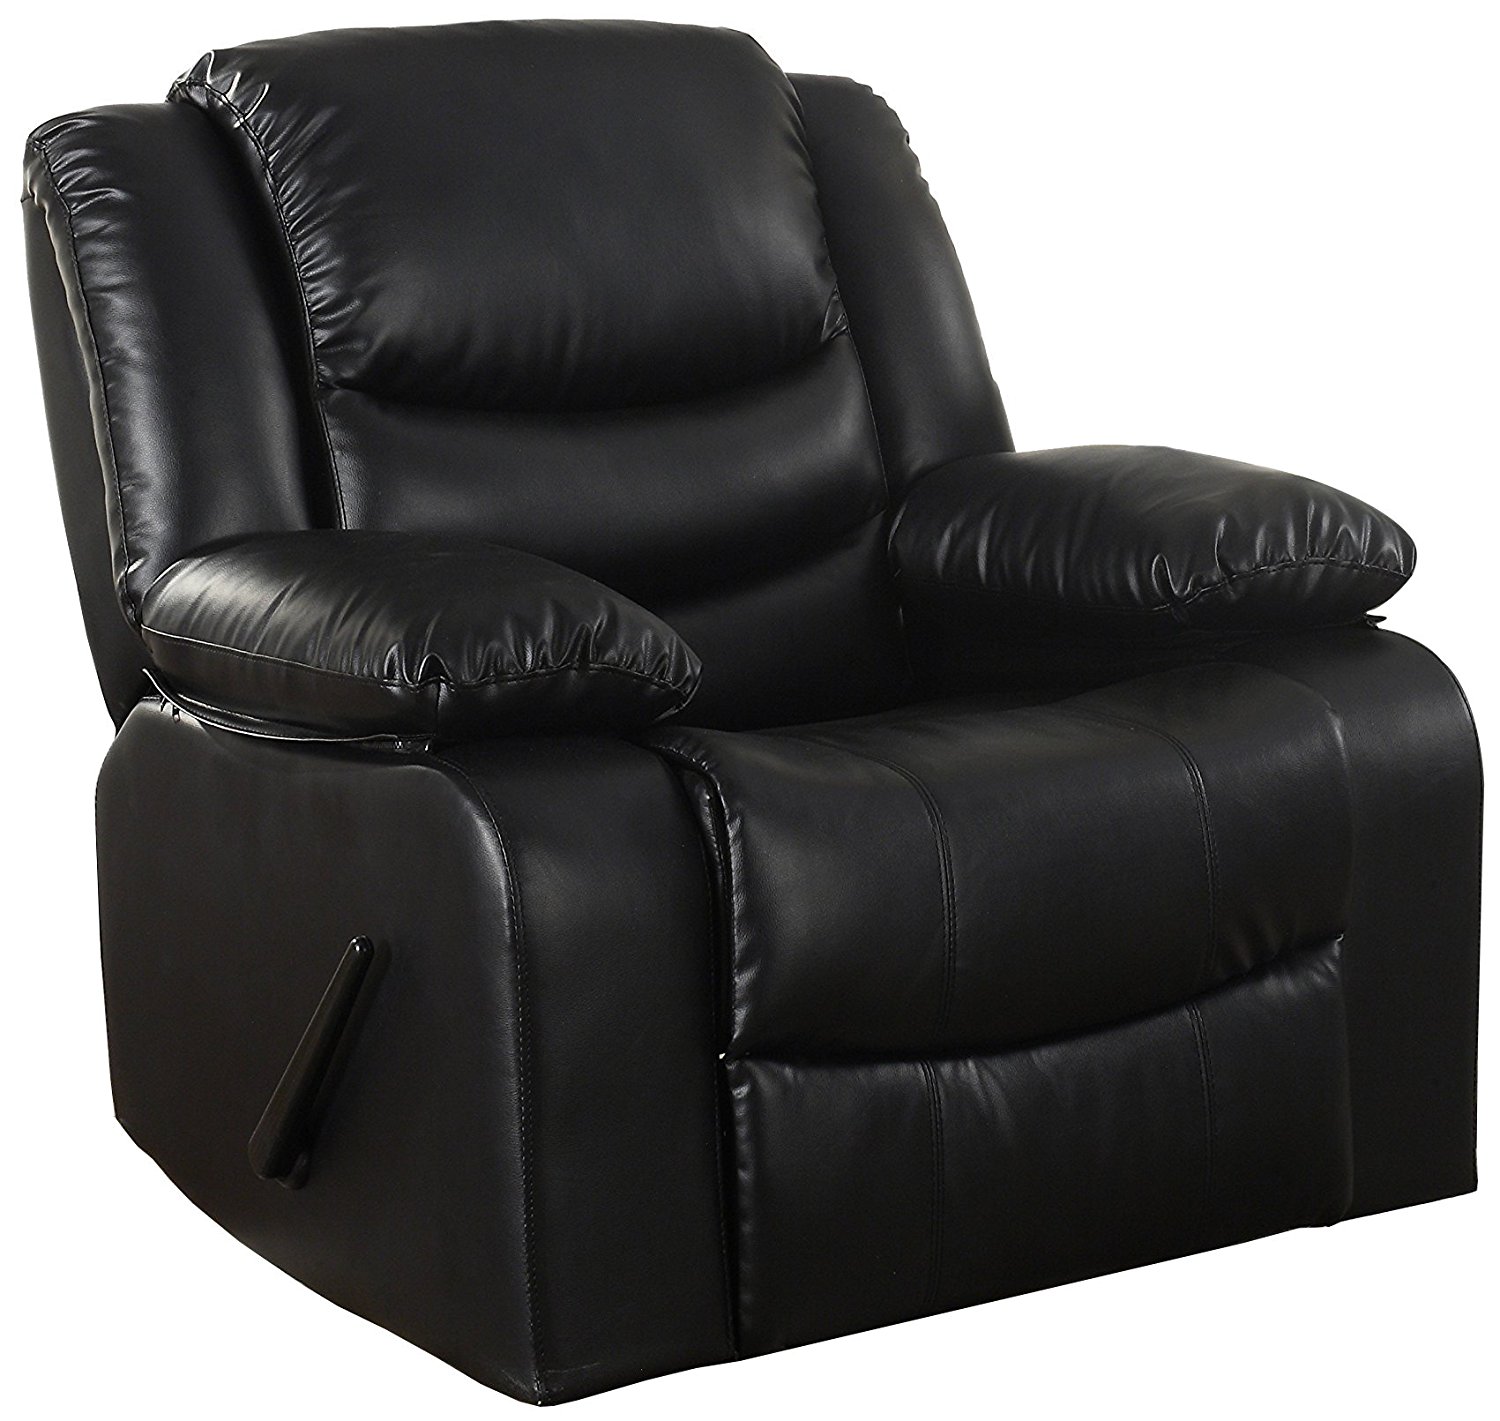 Black reclining rocker with bonded leather upholstery and overstuffed  padded seat and arm rests.